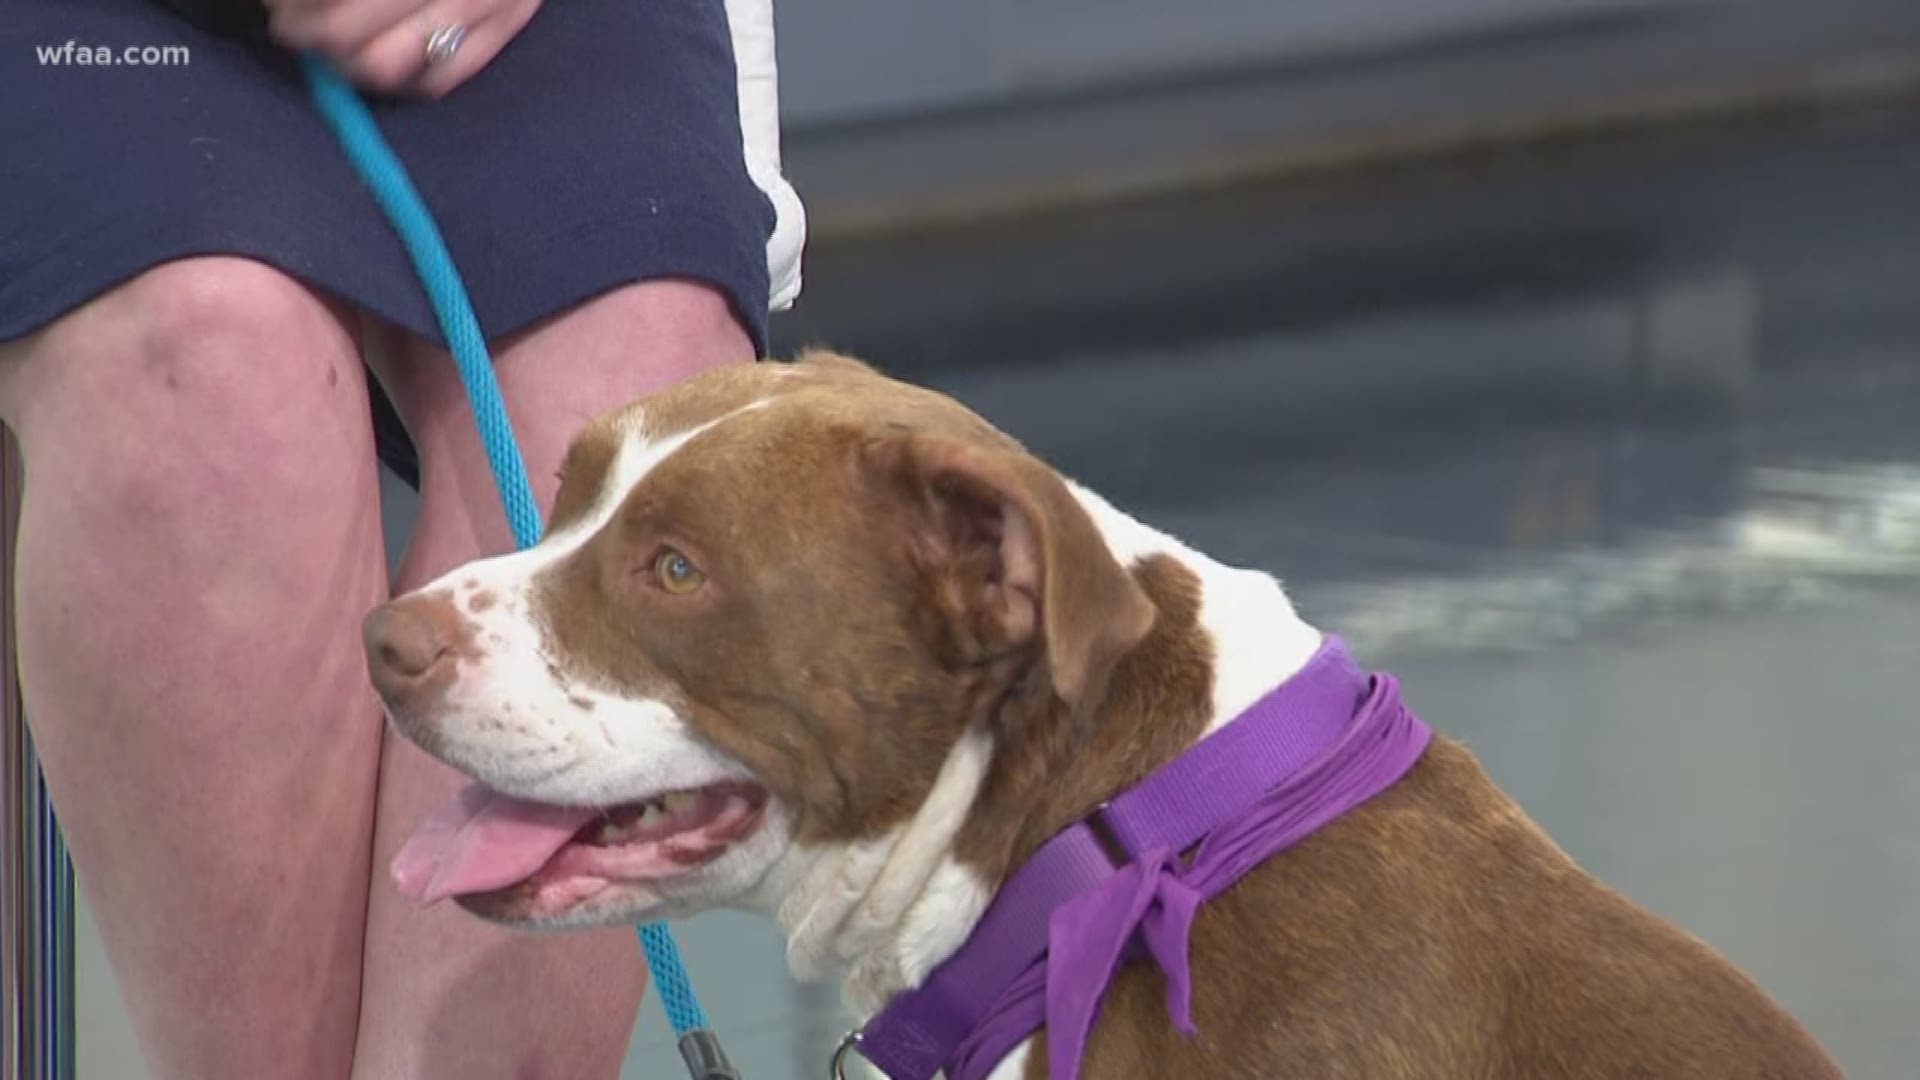 As our "WFAA Tailwagger" hopes for a home, Hansel also hopes to help other pets in need.  The SPCA of Texas once again takes part in North Texas Giving Day.